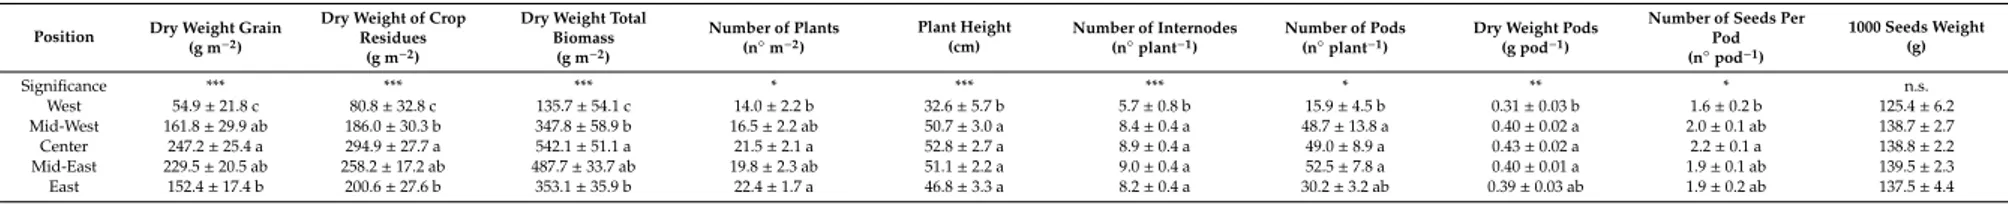 Table 3. Effect of the position in the alley on the measured soybean yield parameters (mean ± standard error)